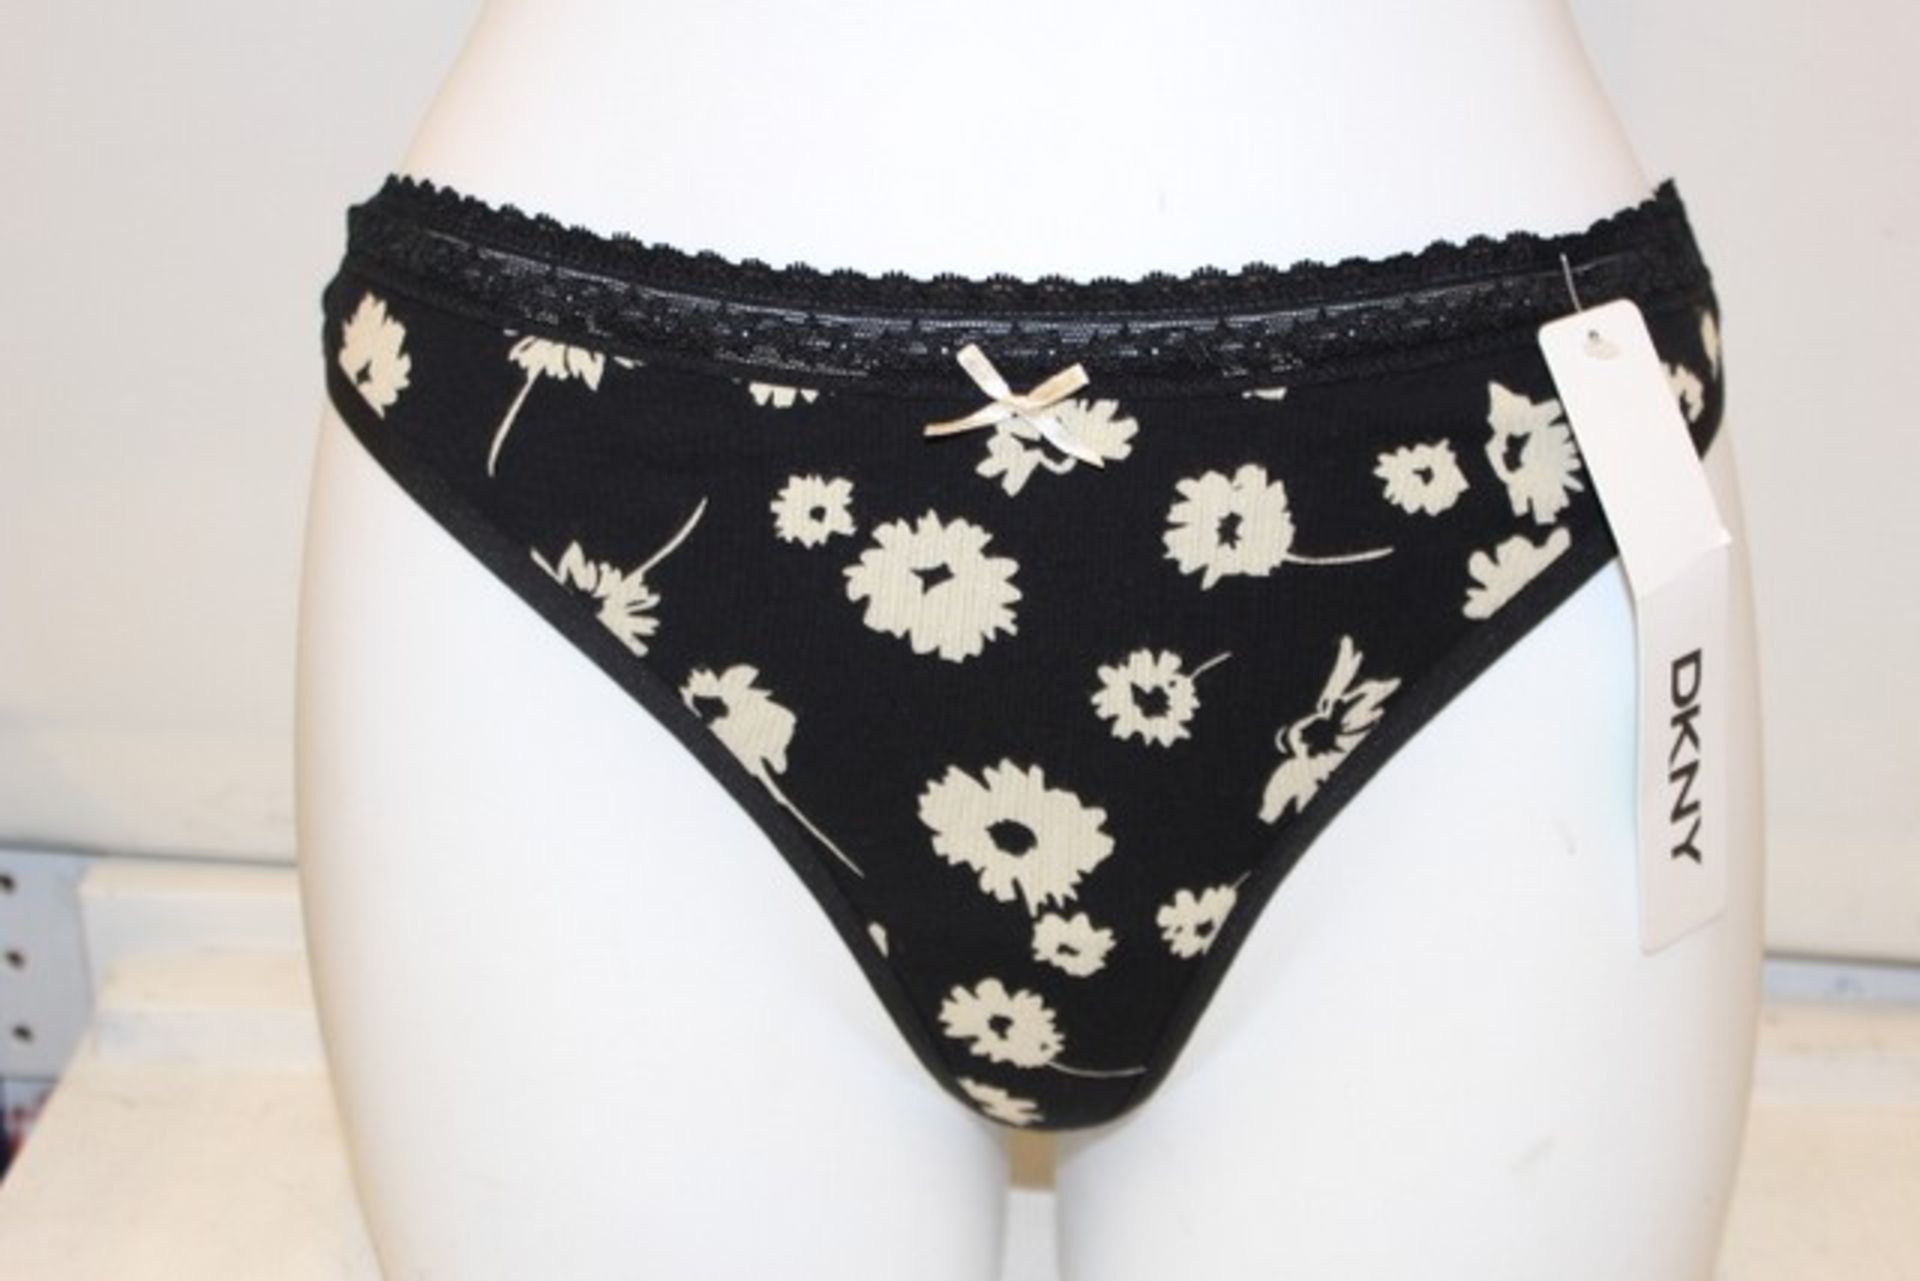 V Brand New A Lot Of Five DKNY Black Floral Pattern Thongs Size L ISP £18 (Shopstyle)